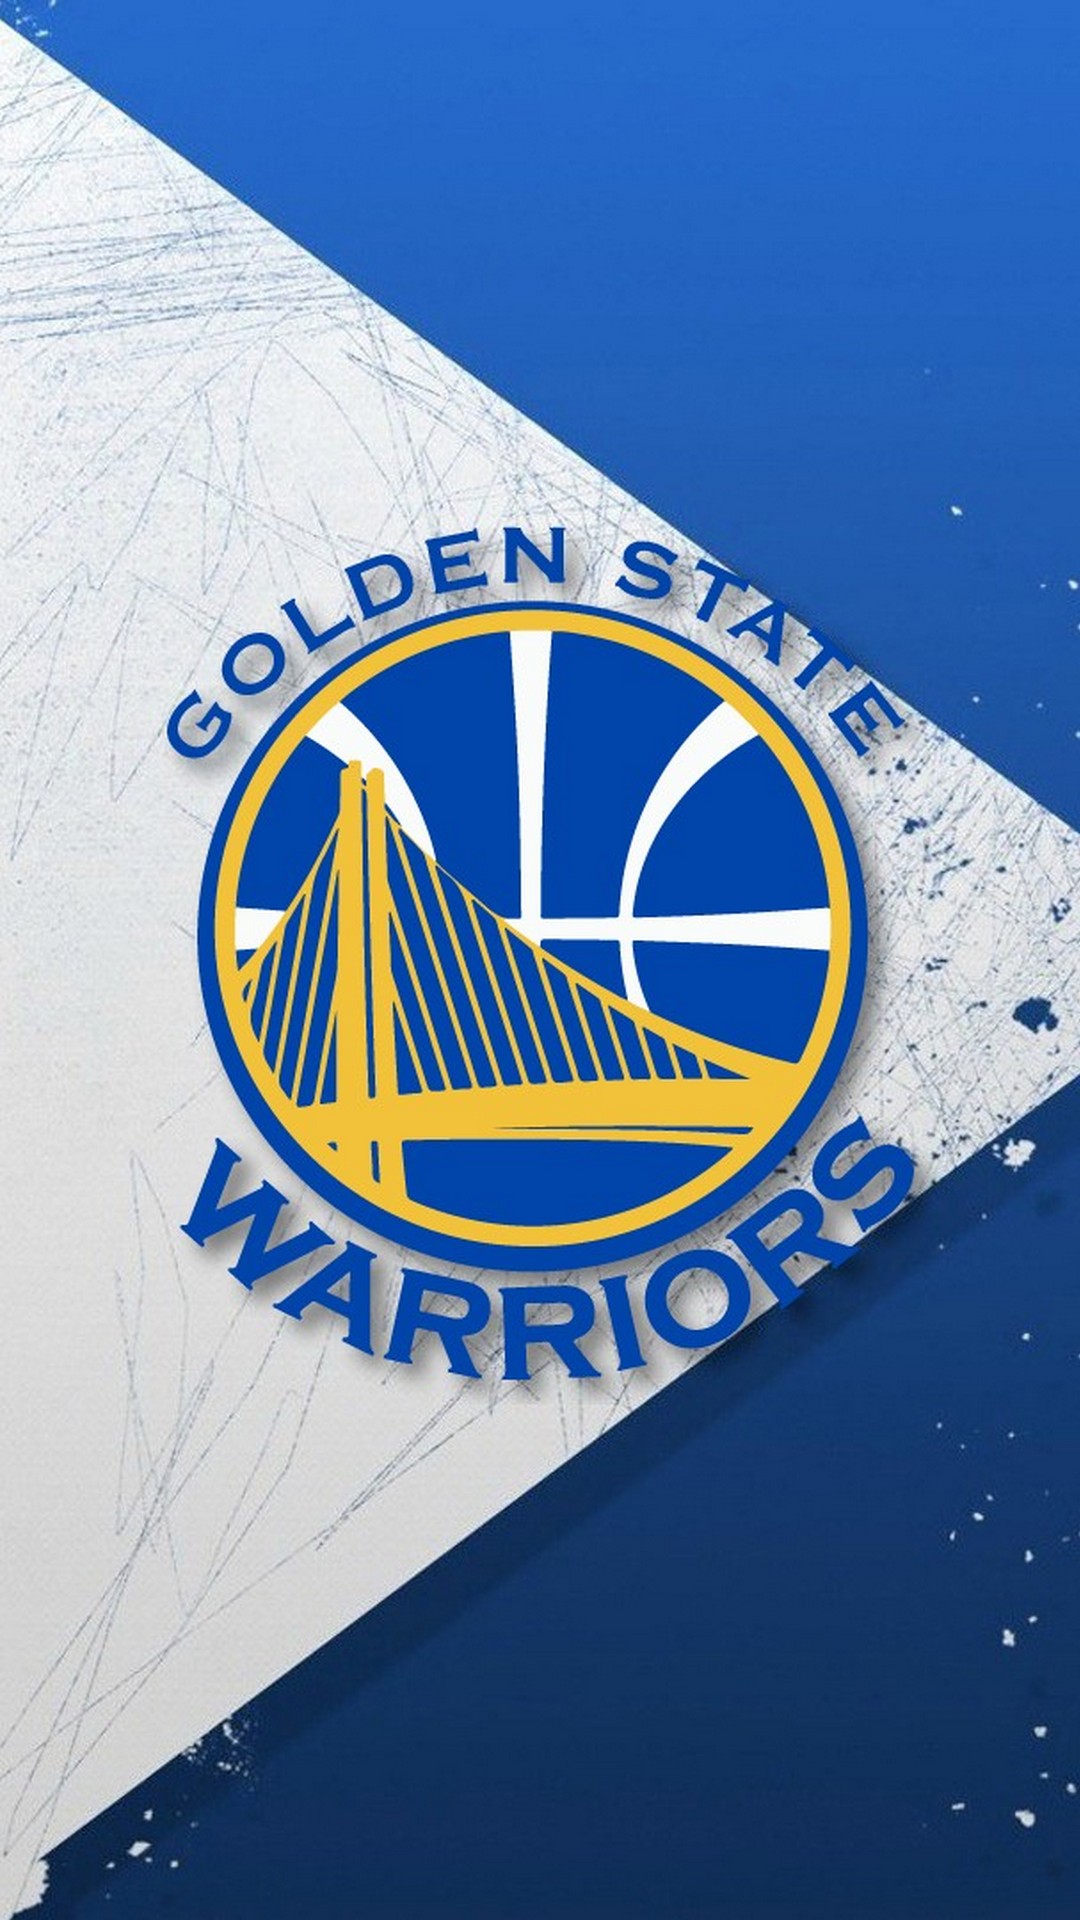 Wallpaper iPhone Golden State Warriors with resolution 1080X1920 pixel. You can make this wallpaper for your iPhone 5, 6, 7, 8, X backgrounds, Mobile Screensaver, or iPad Lock Screen